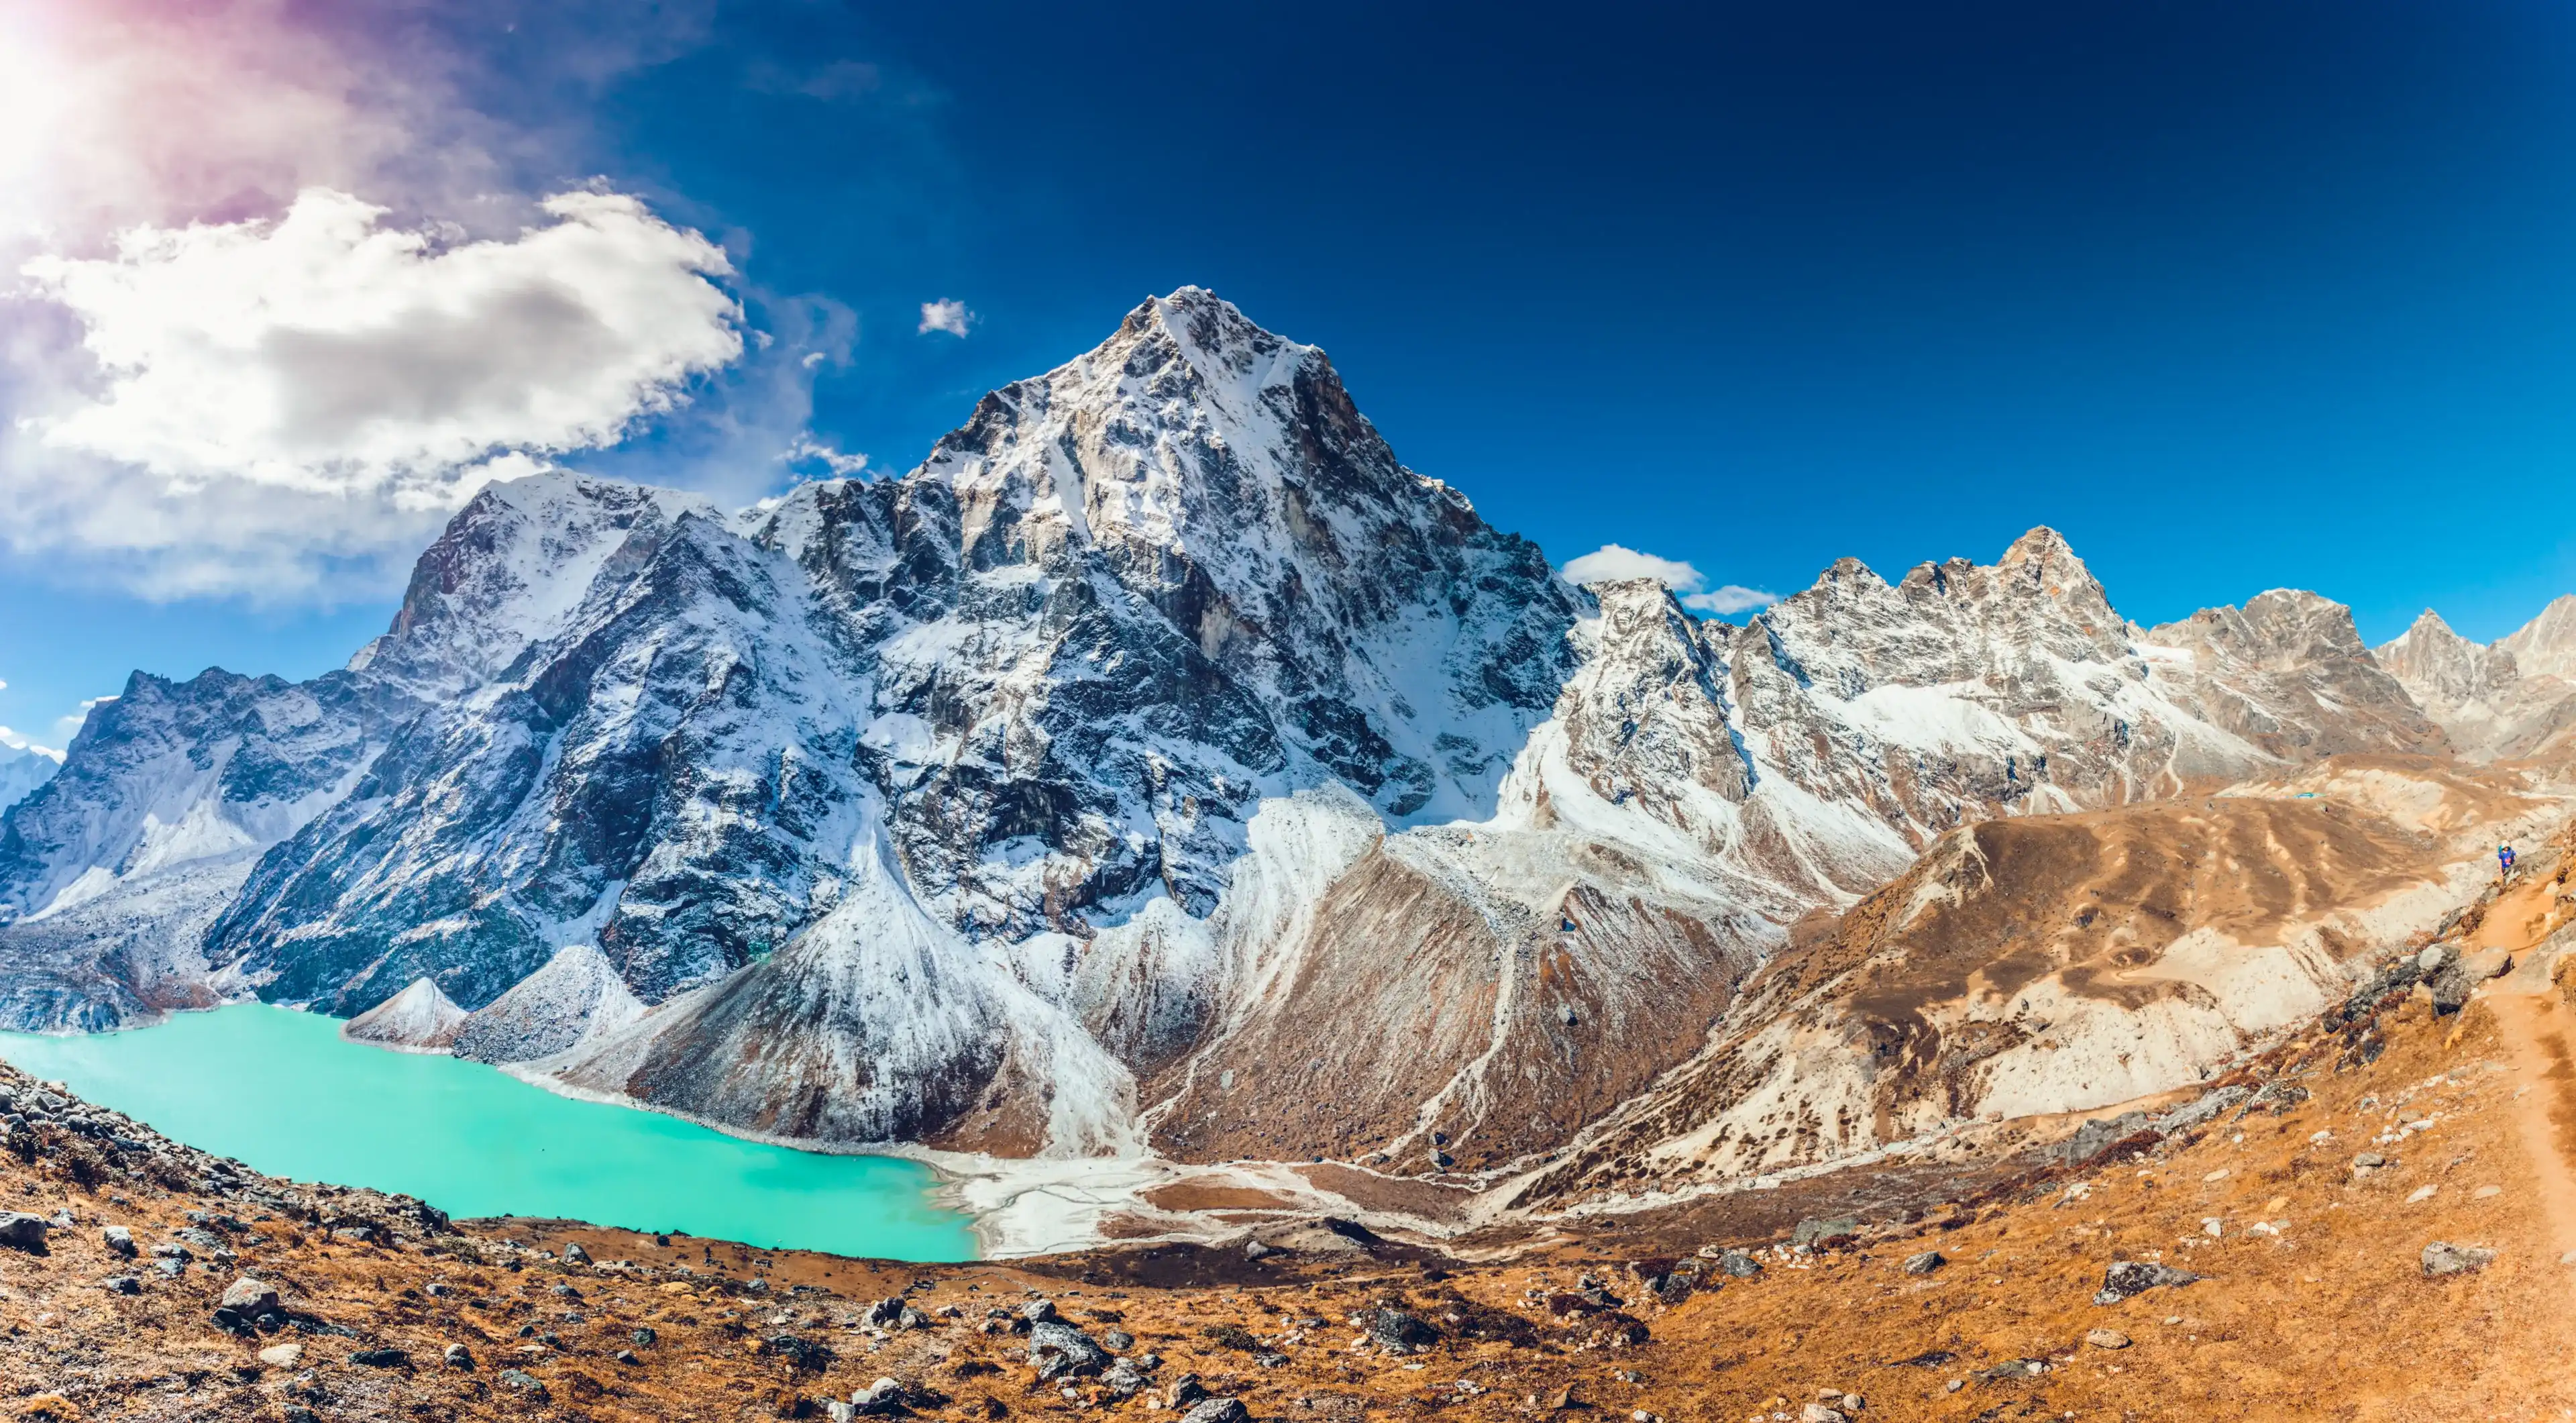 Valley of Himalayan mountains with mountain lake on track to Everest base camp. High mountains with snow-capped peaks. Khumbu valley, Sagarmatha national park, Nepal. Beautiful mountain landscape.